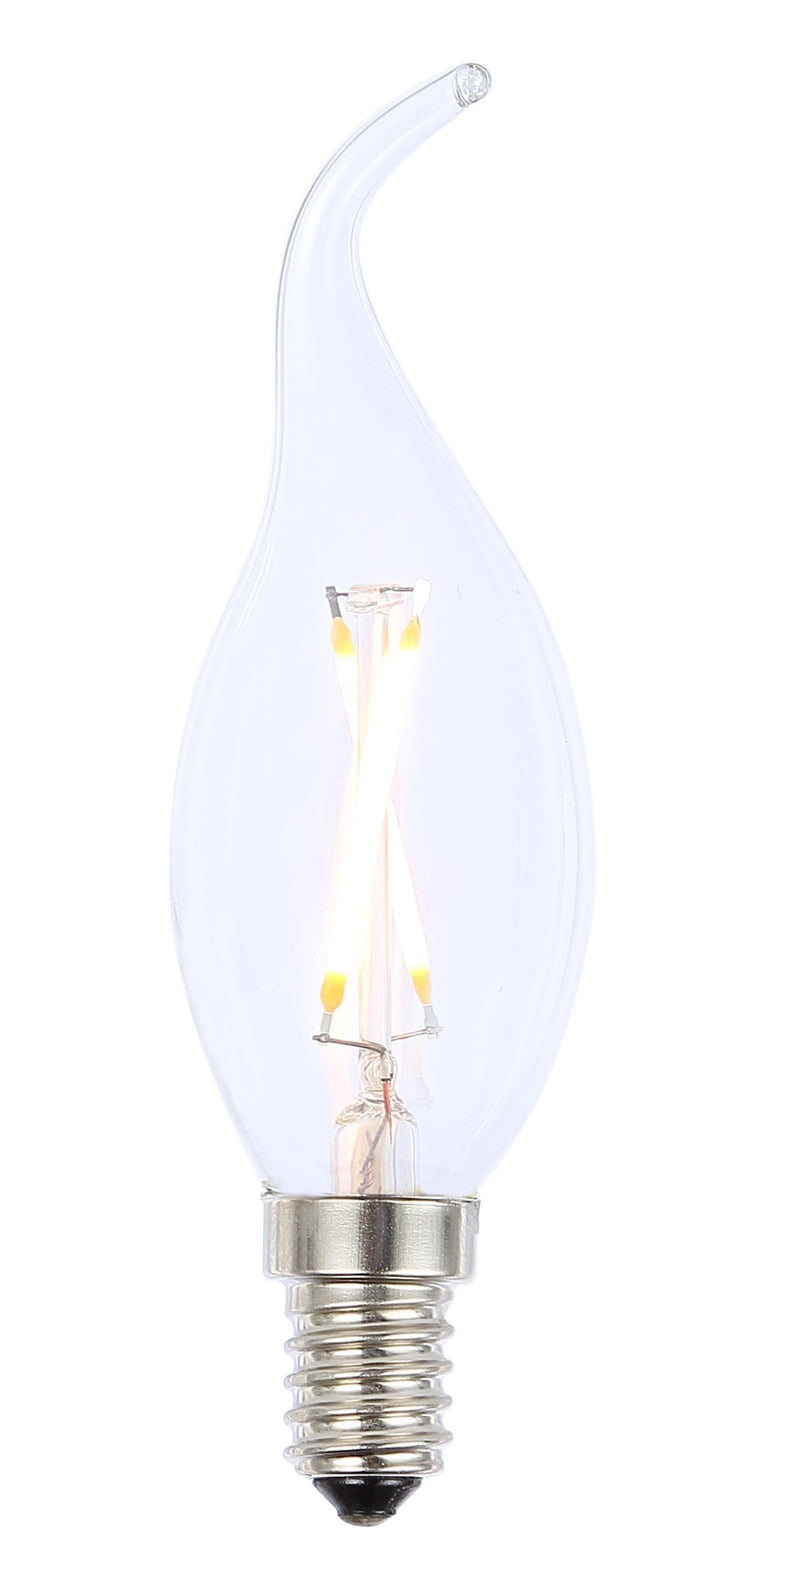 2w LED Bent Tip flicker Candle SES Tinted Filament Lamp